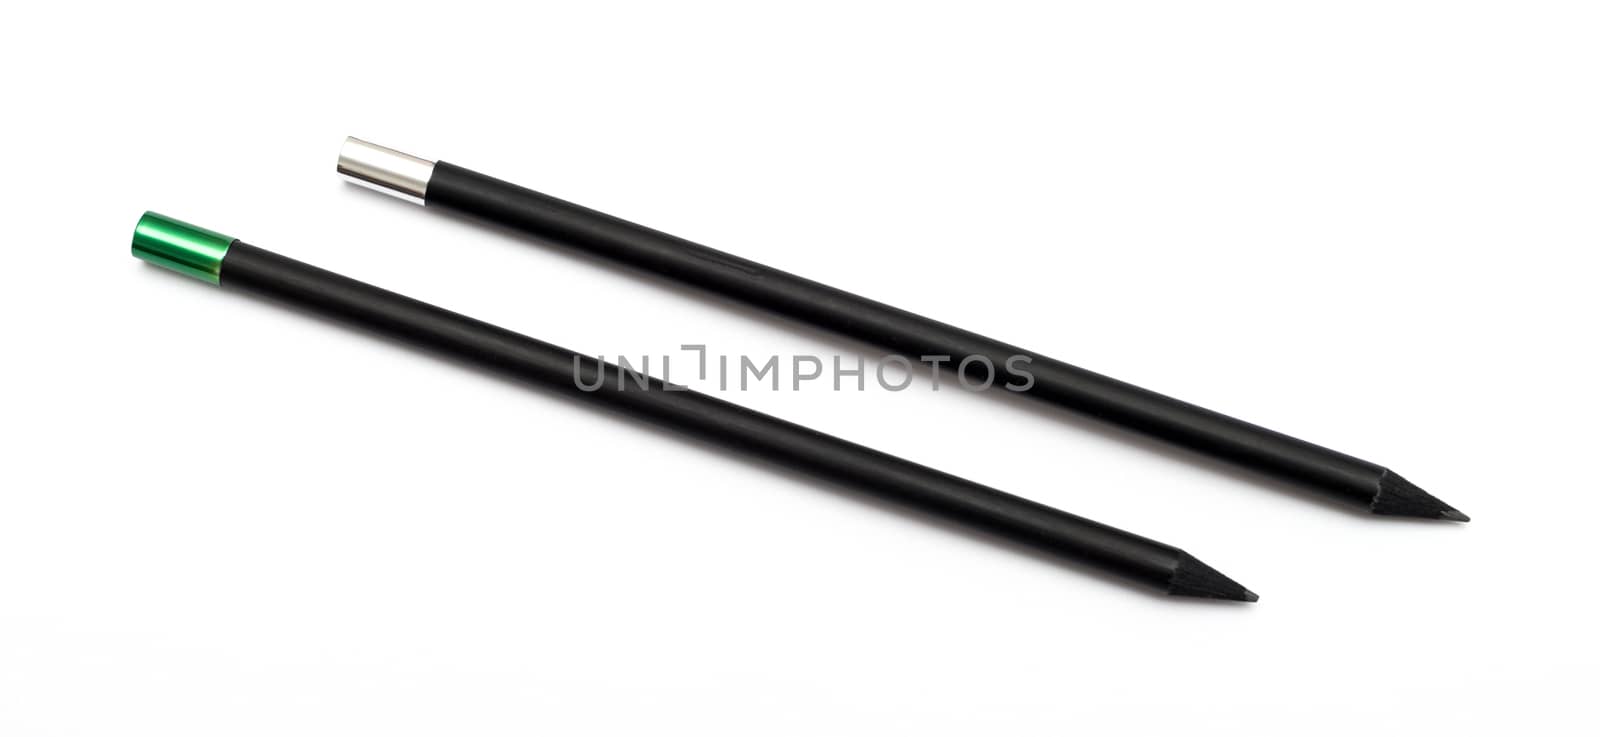 Black pencils isolated on a white background by DNKSTUDIO